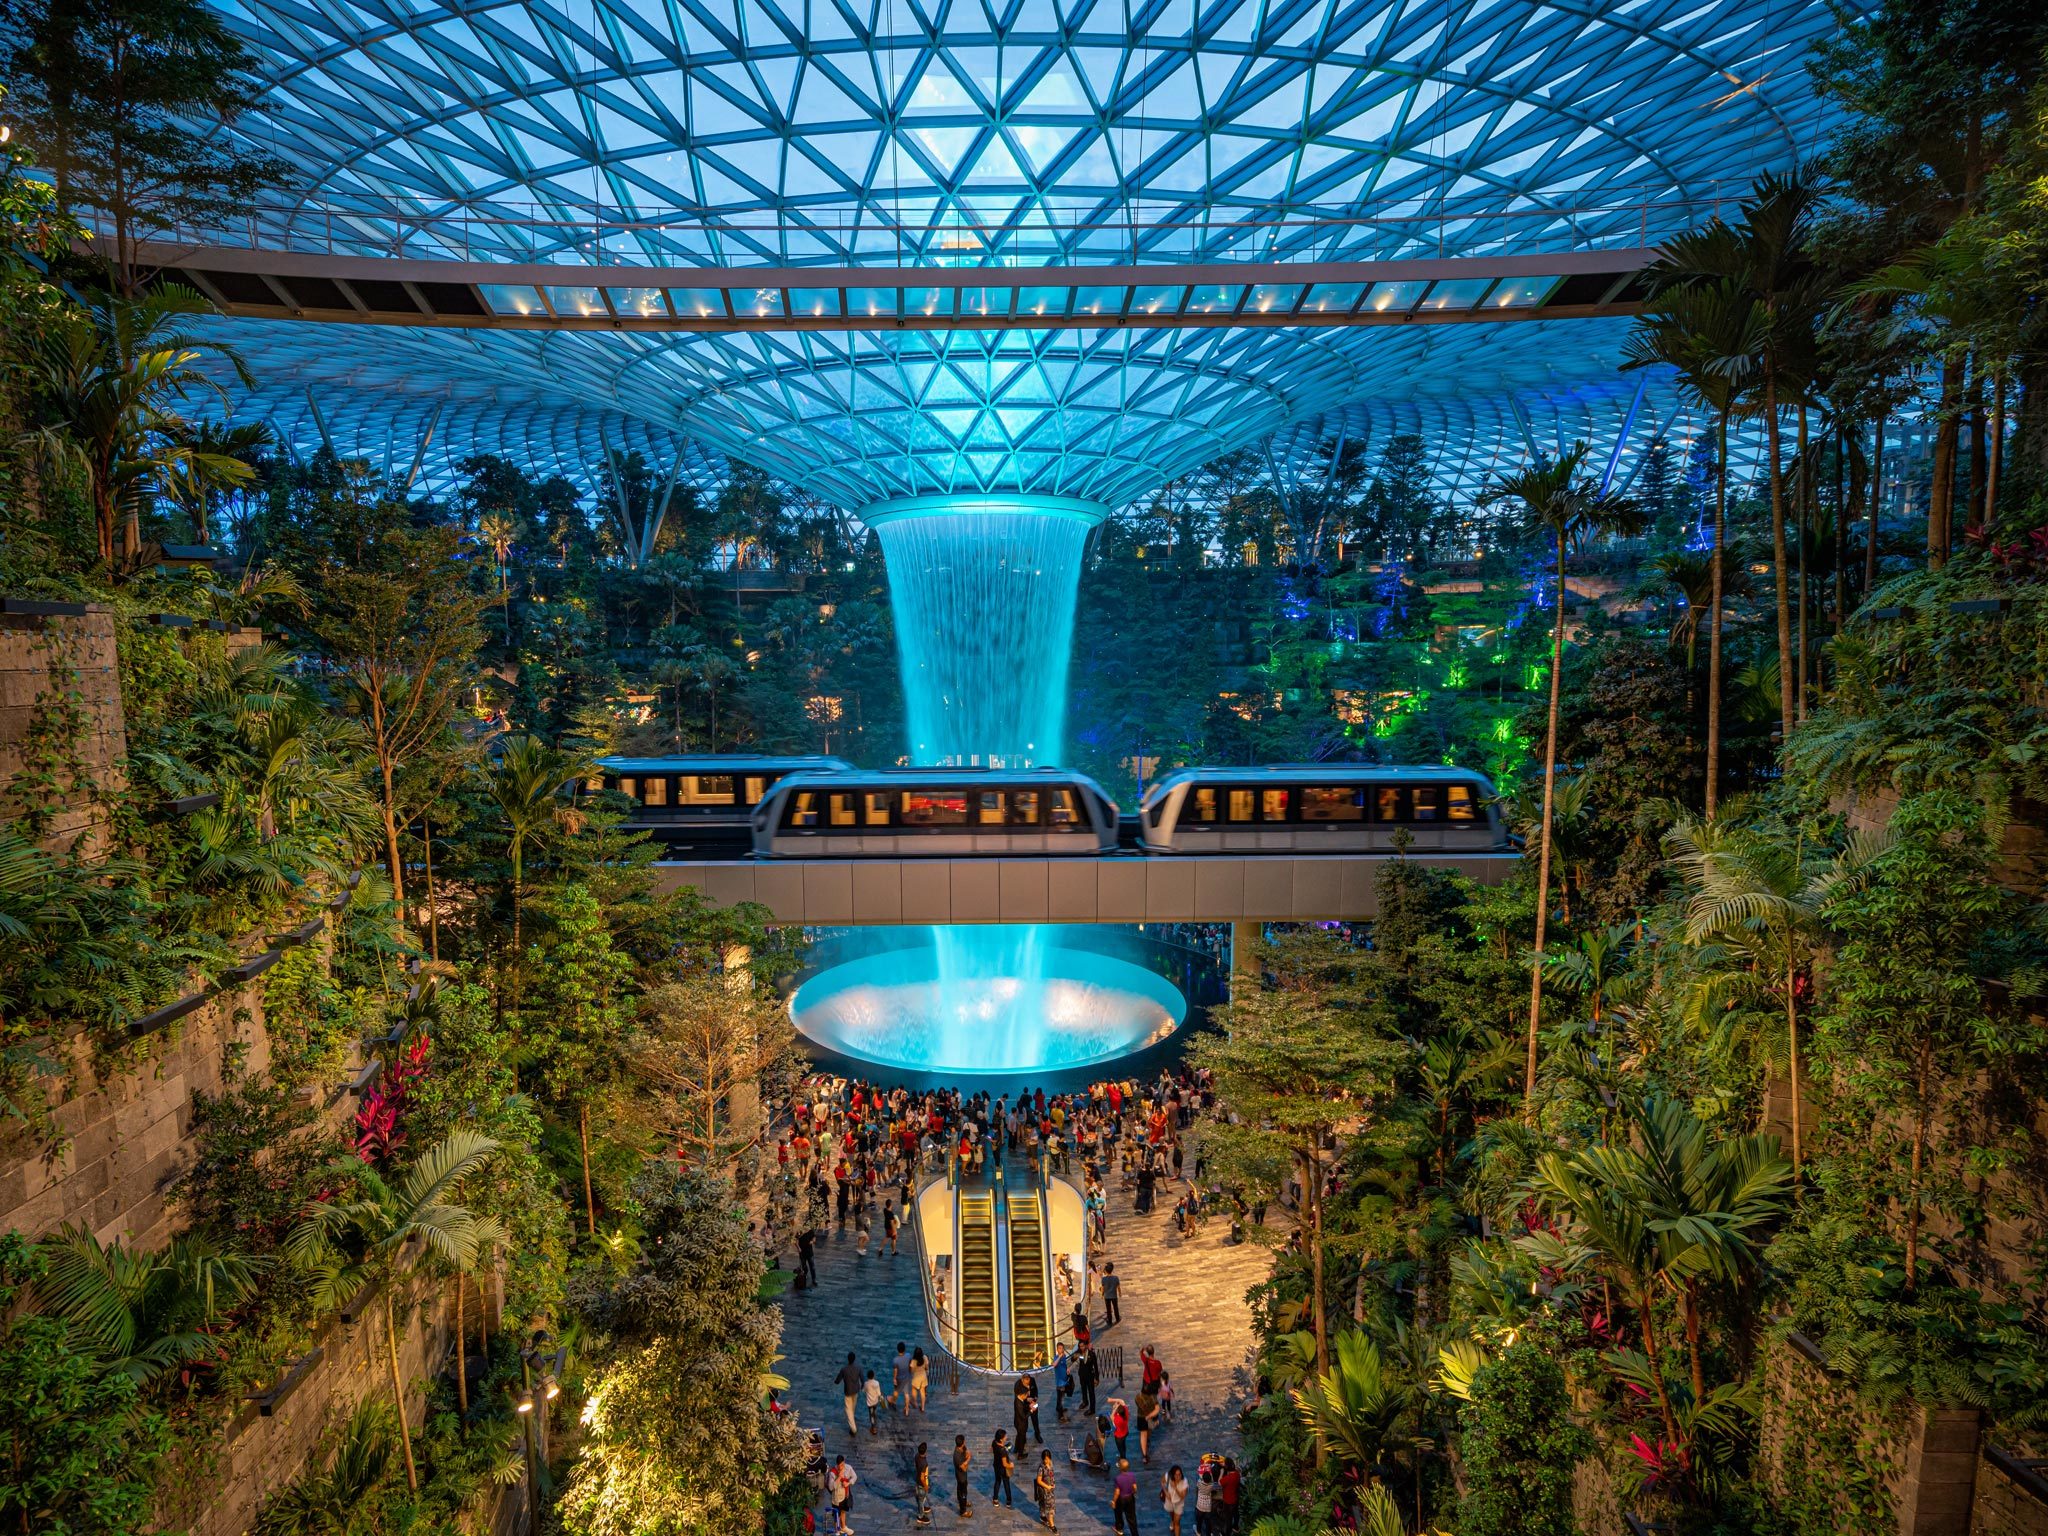 Singapore's Changi Airport is crowned World's Best Airport for 2023